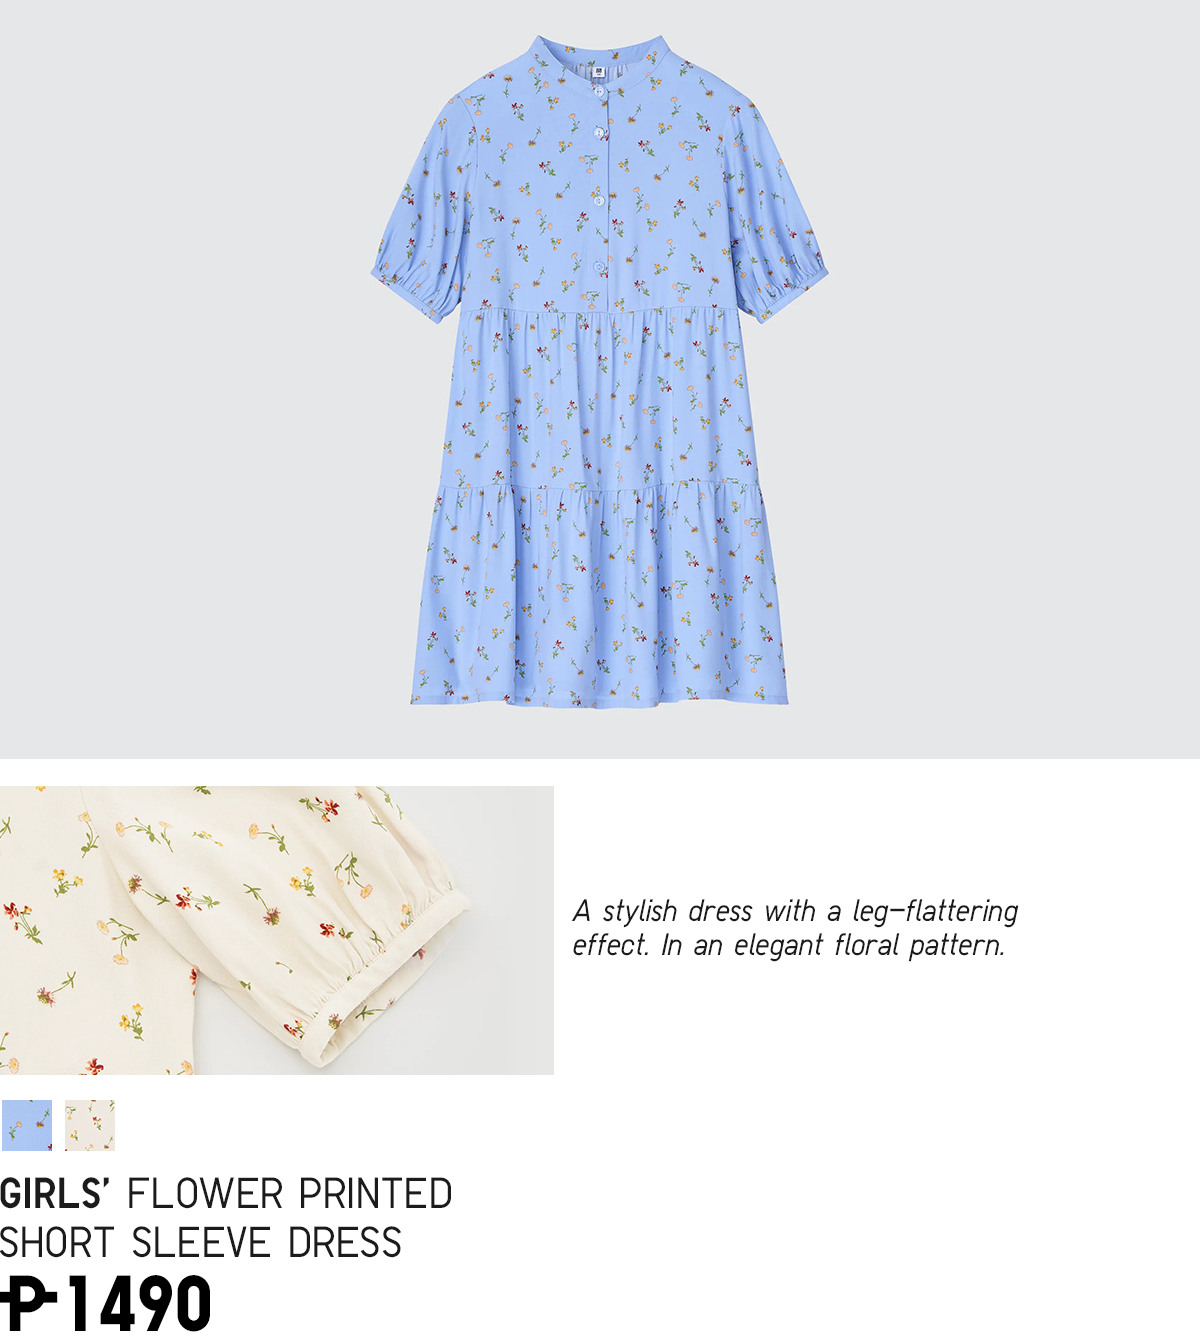  A stylish dress with a legflattering effect. In an elegant floral pattern. - GIRLS FLOWER PRINTED SHORT SLEEVE DRESS P-1490 